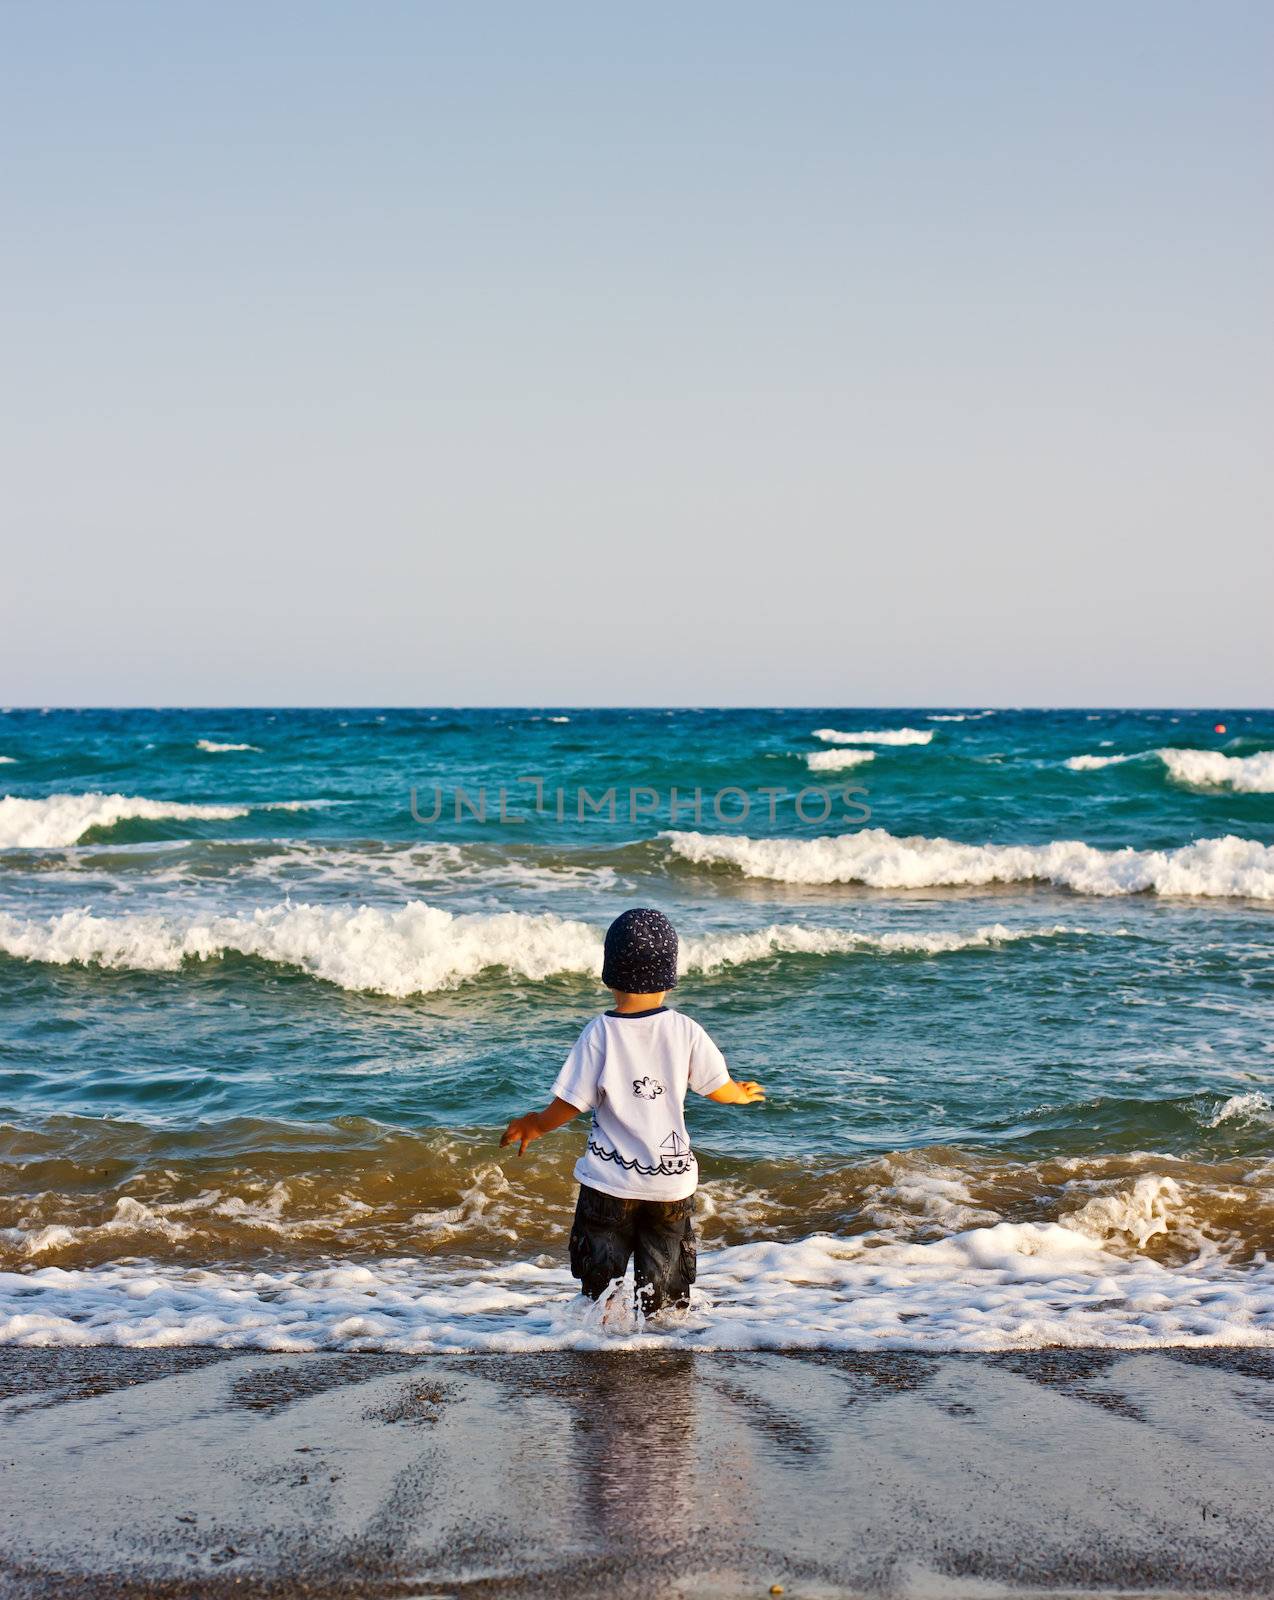 The boy stands on the beach and looks at sea